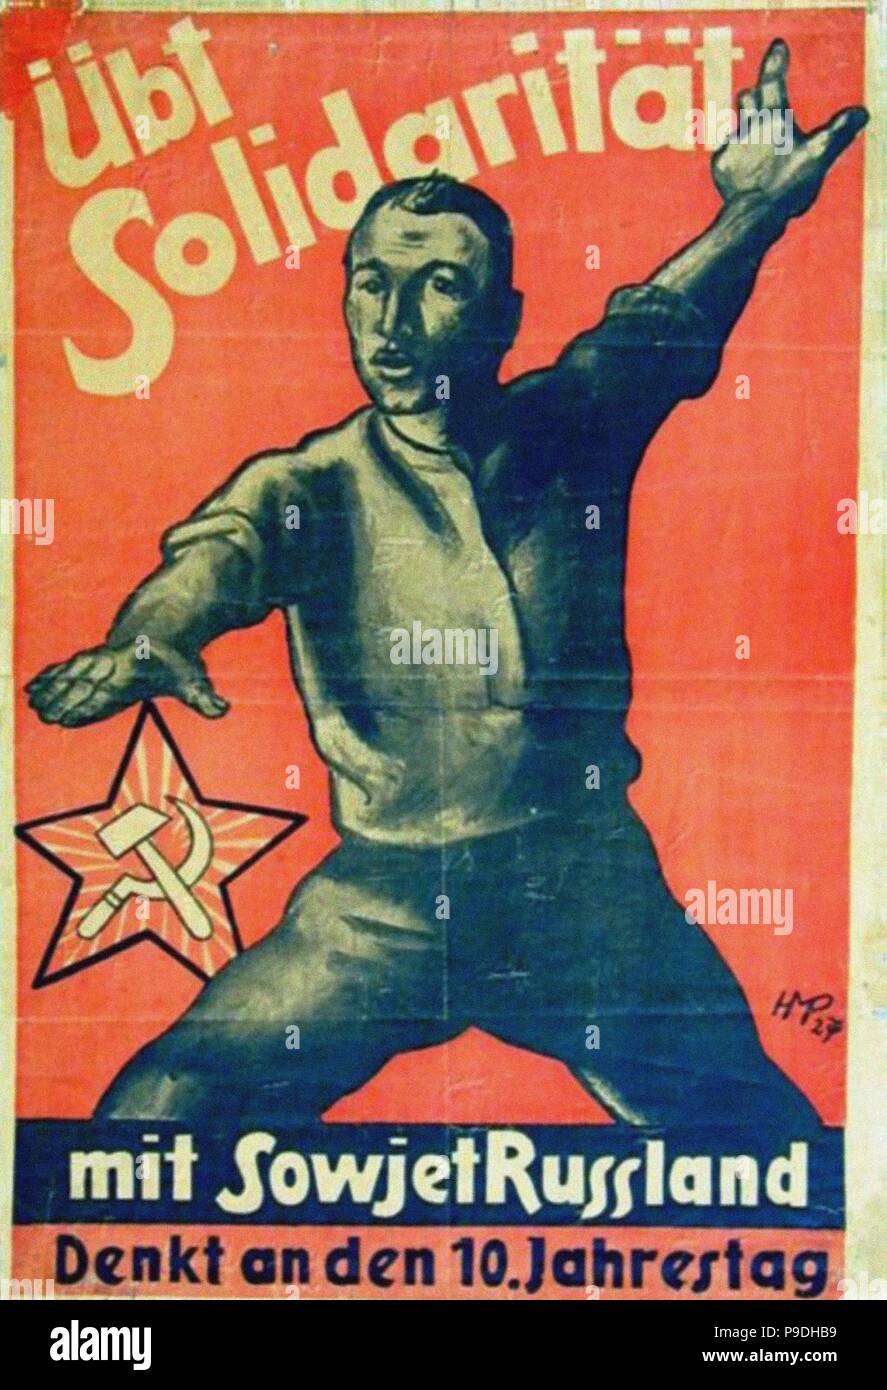 Show Solidarity with Soviet Russia! Think of the 10th anniversary!. Museum: PRIVATE COLLECTION. Stock Photo